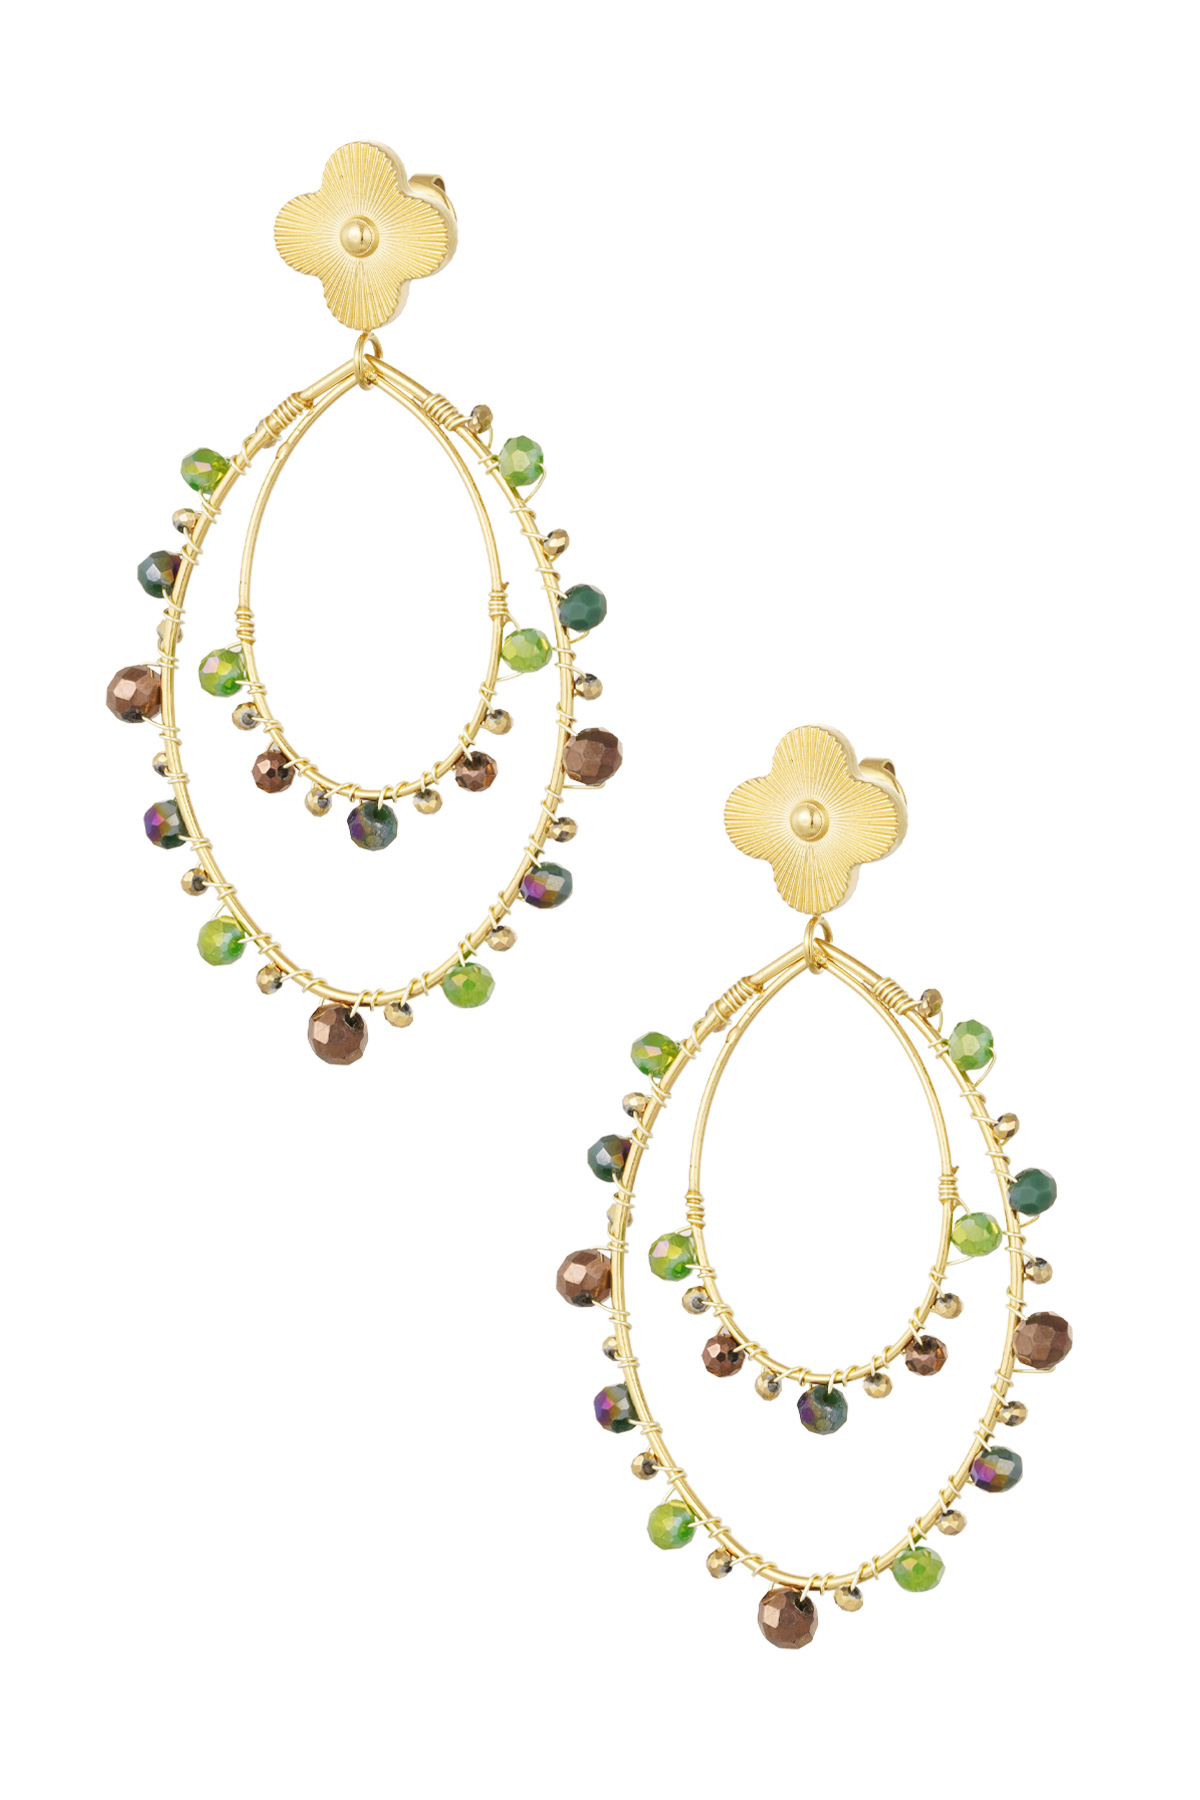 Oval earrings with beads - gold/green